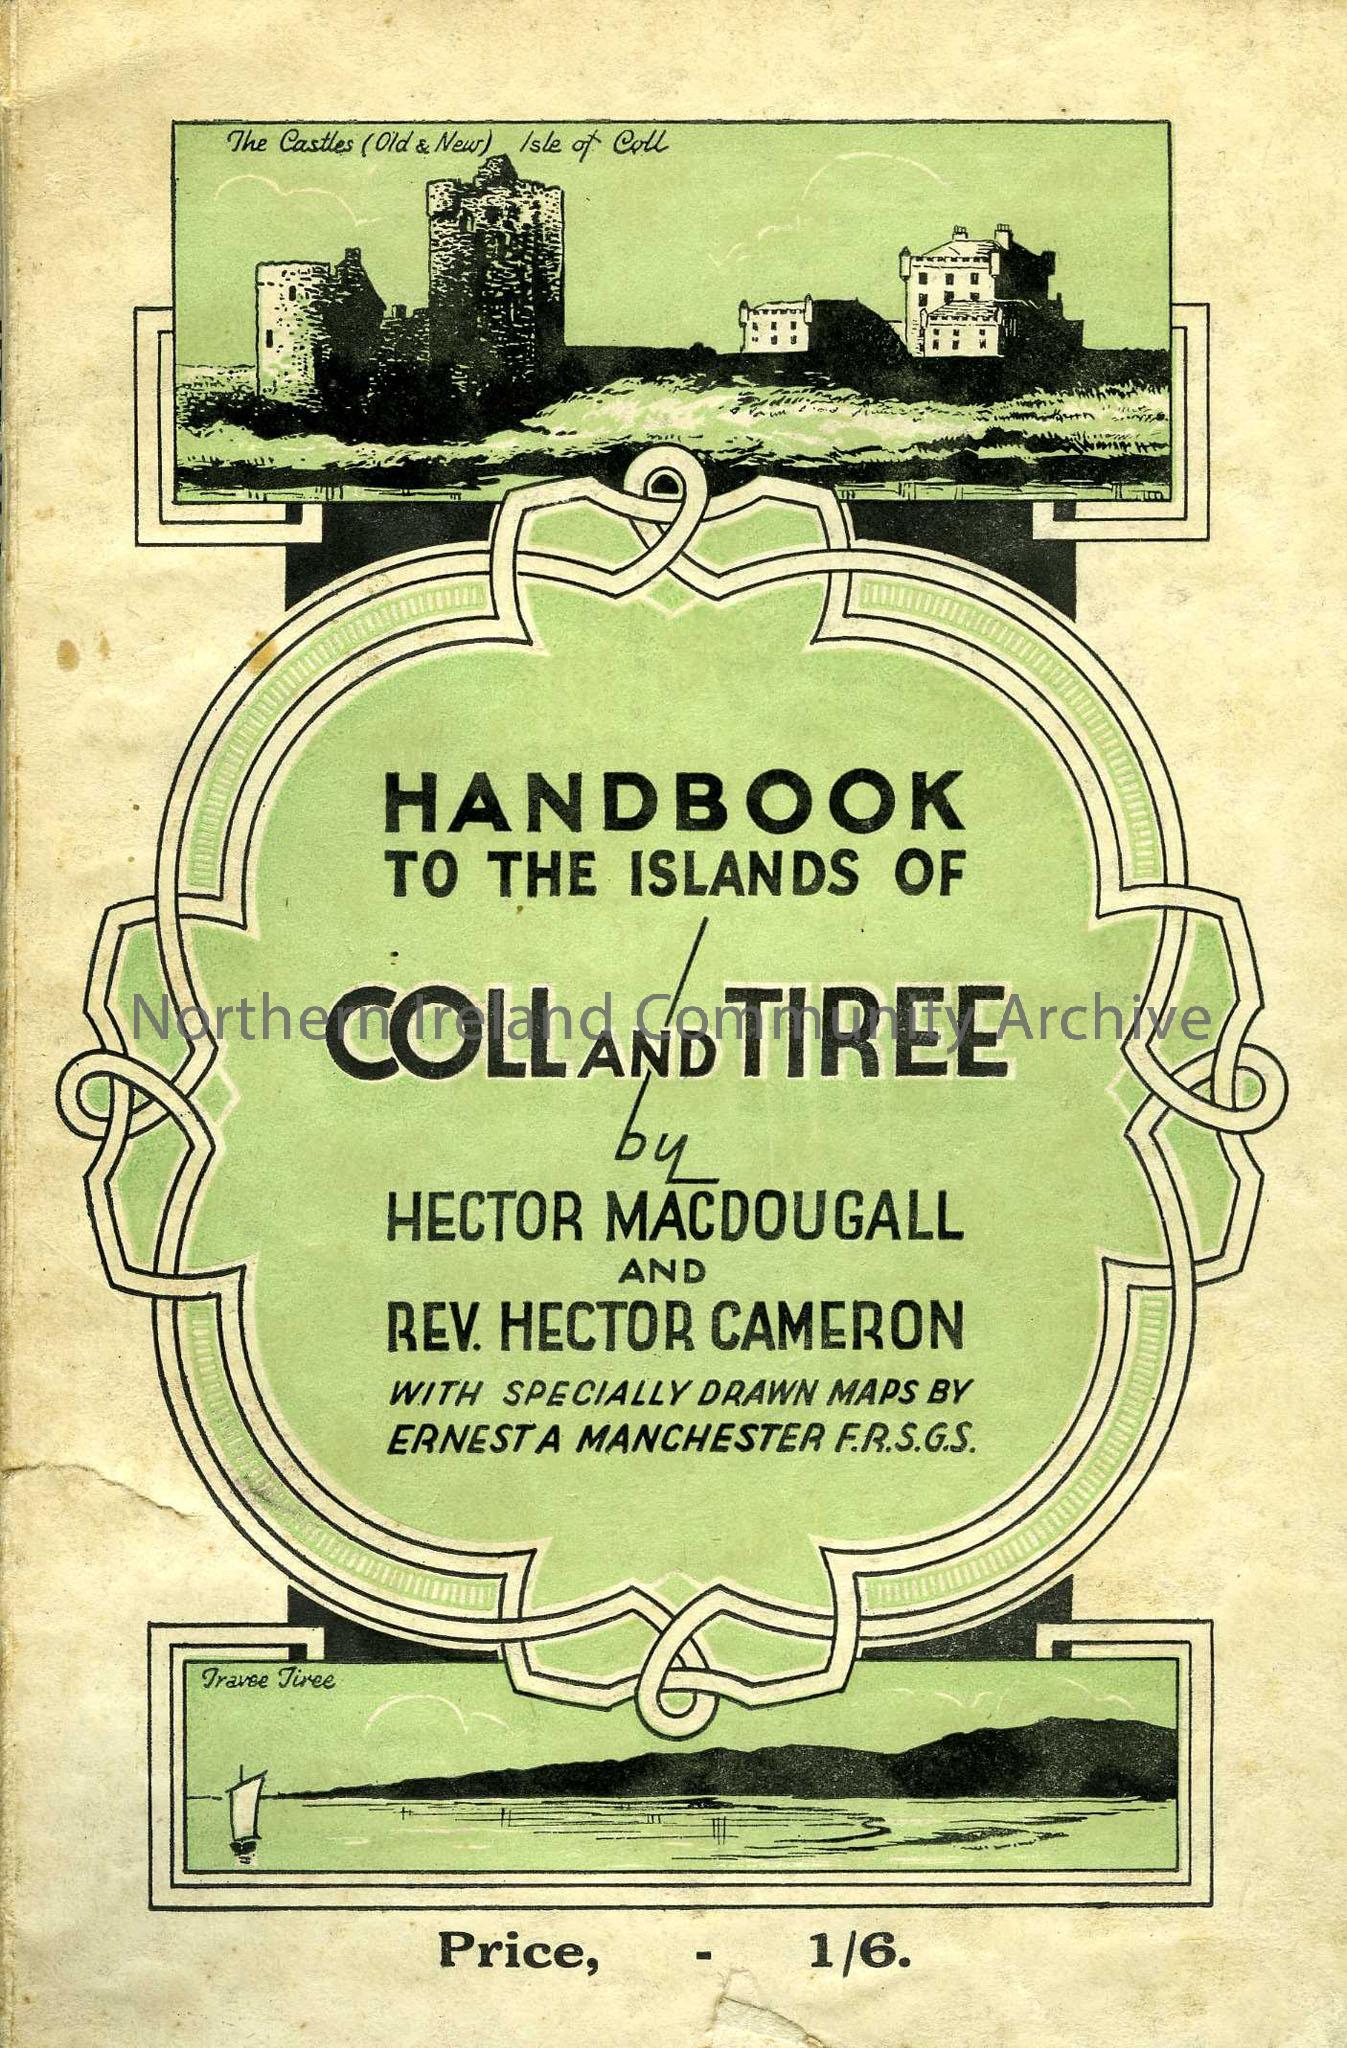 Handbook to the Islands of Coll and Tiree